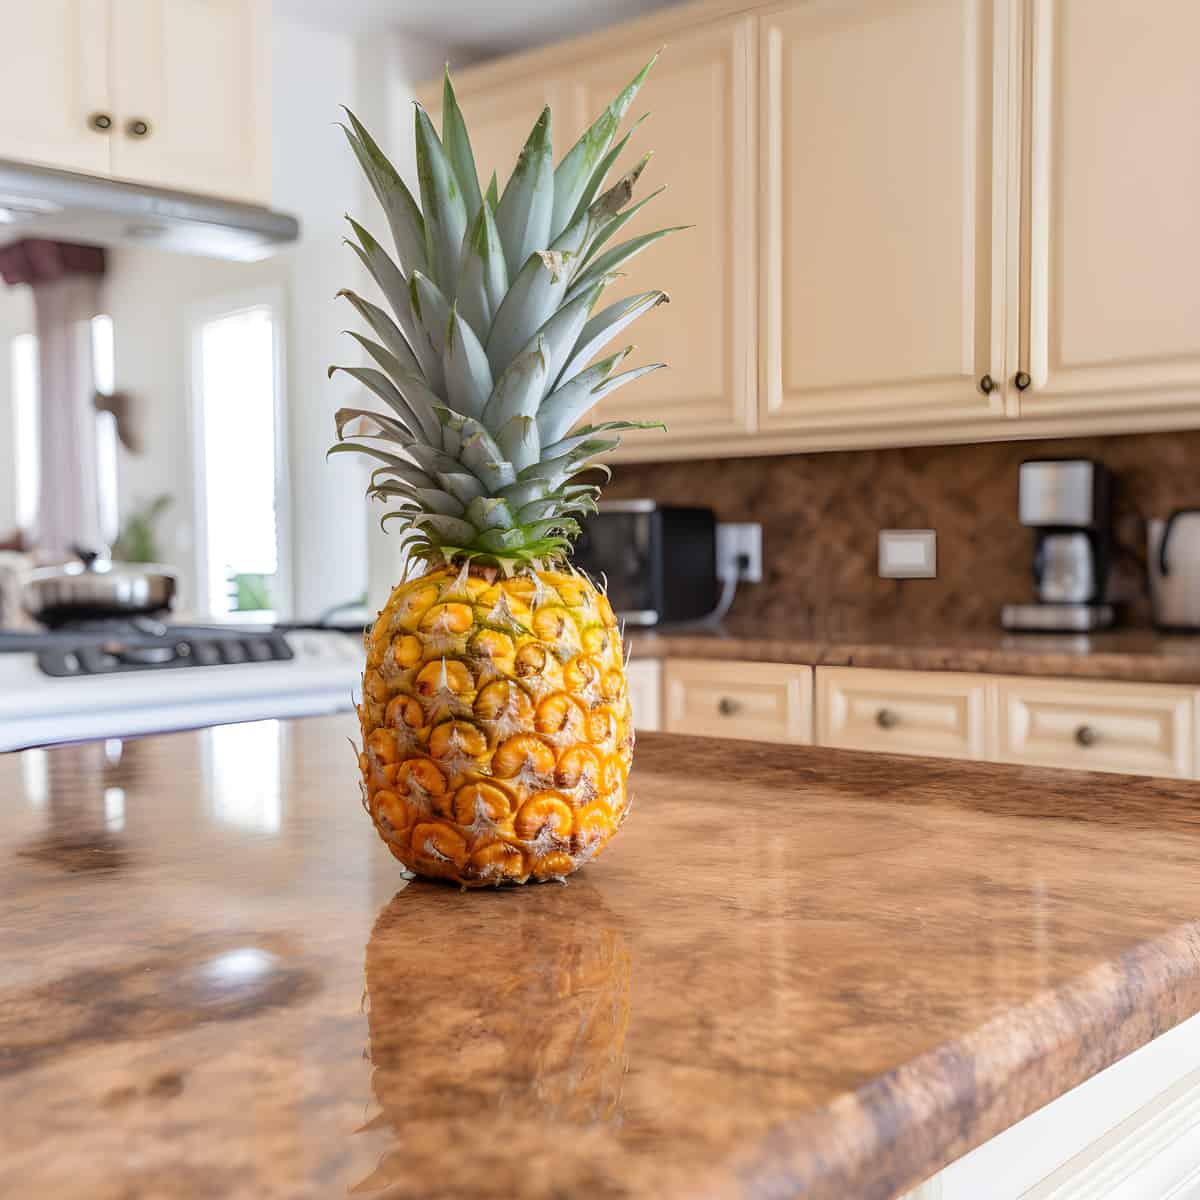 False Pineapple on a kitchen counter